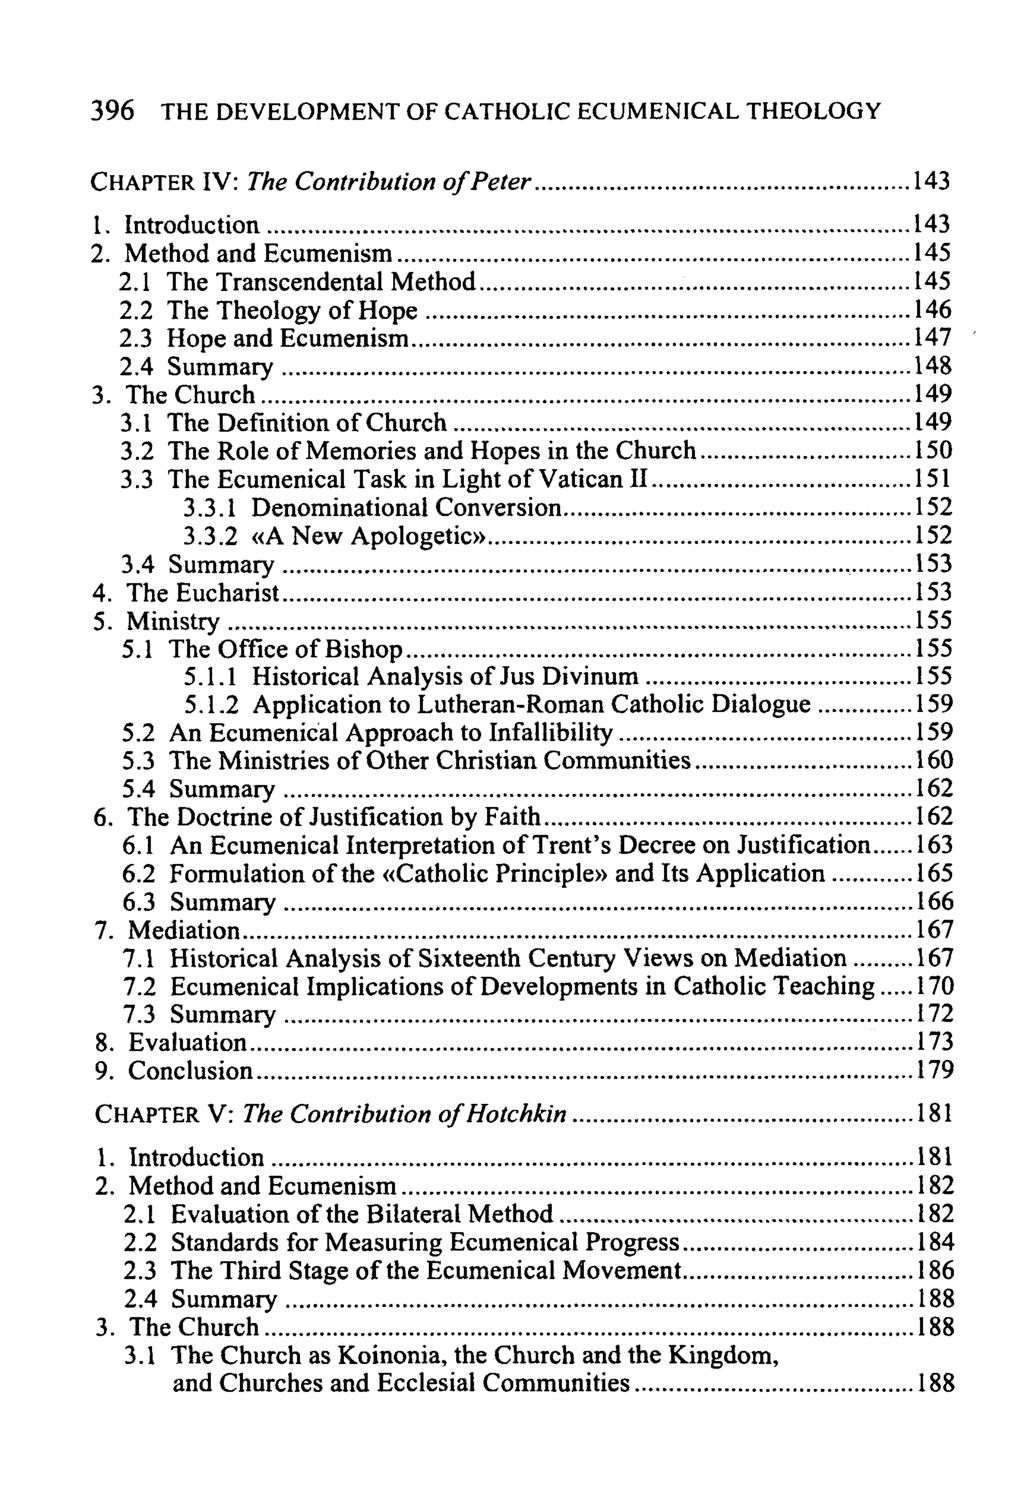 396 THE DEVELOPMENT OF CATHOLIC ECUMENICAL THEOLOGY CHAPTER IV: The Contribution of Peter 143 1. Introduction 143 2. Method and Ecumenism 145 2.1 The Transcendental Method 145 2.